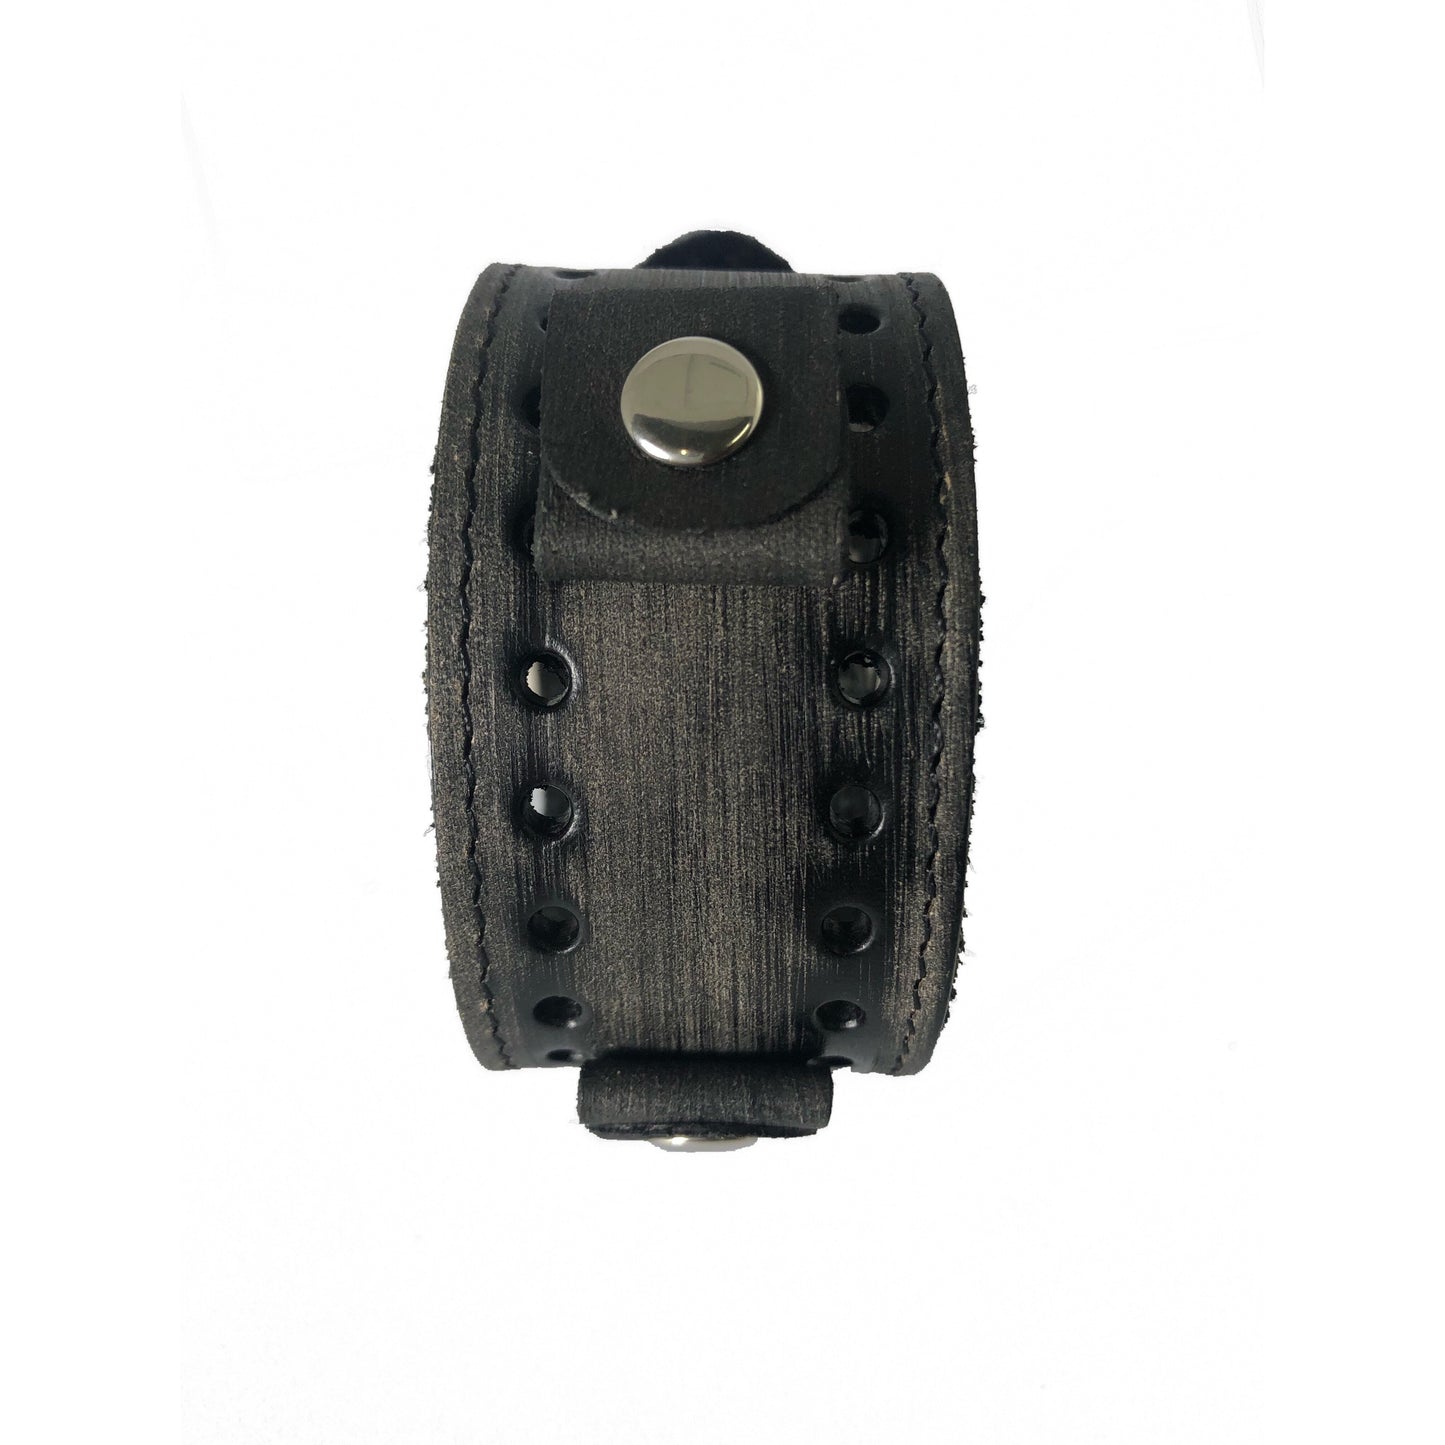 Sully Black/White Watch with Distressed Black Leather Cuff